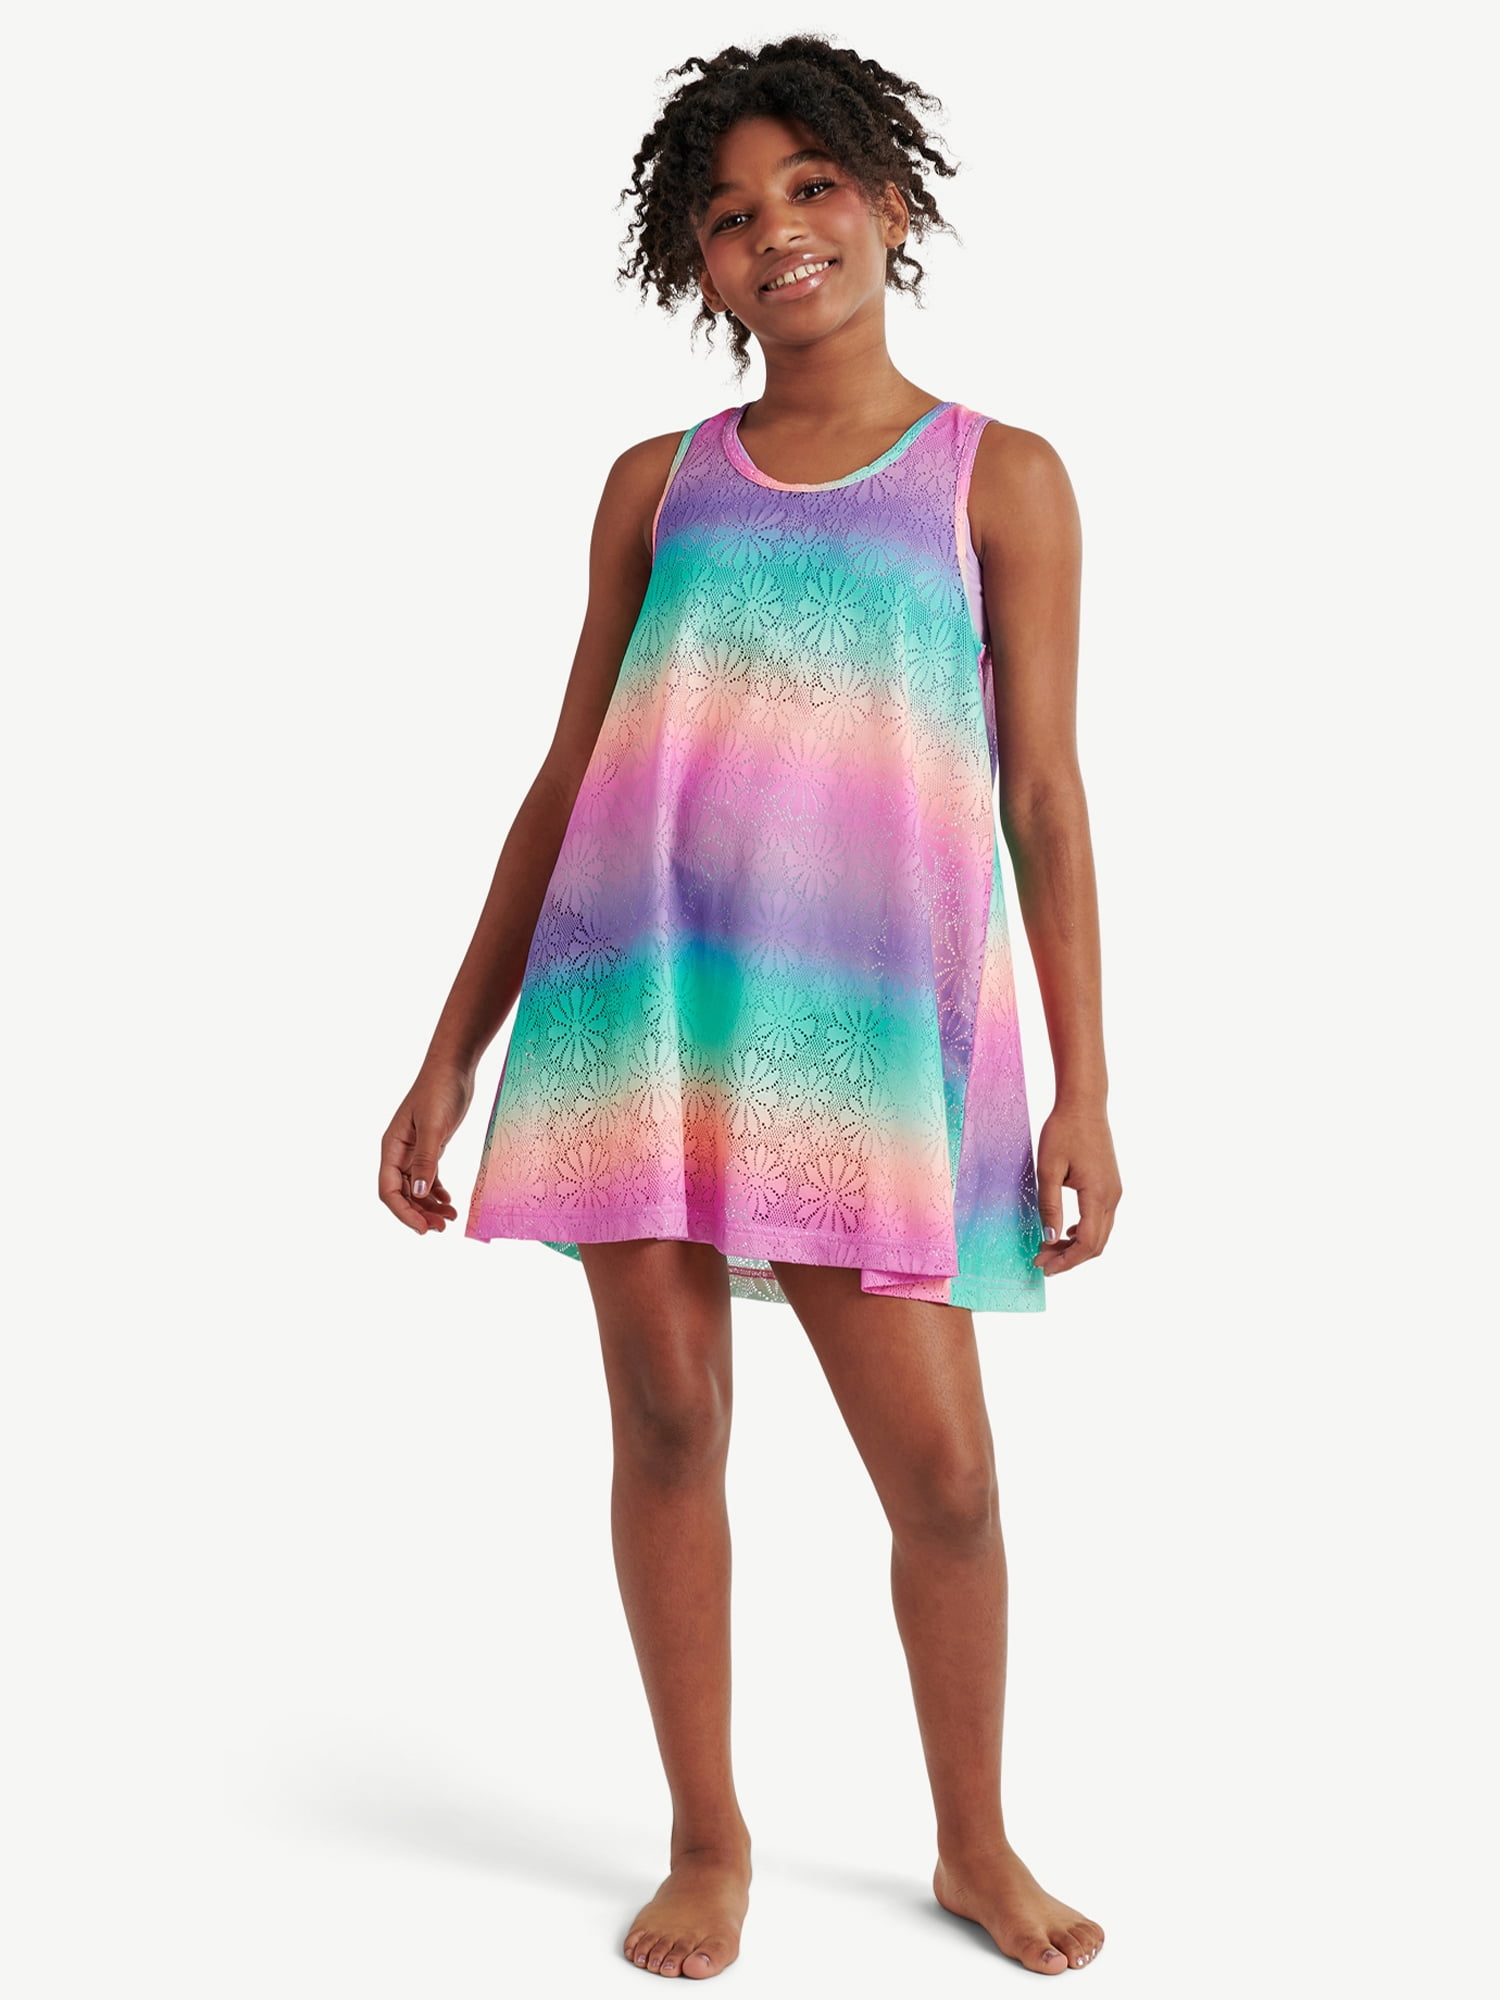 Justice Girls Swimsuit Cover Up Dress, Sizes 5-18